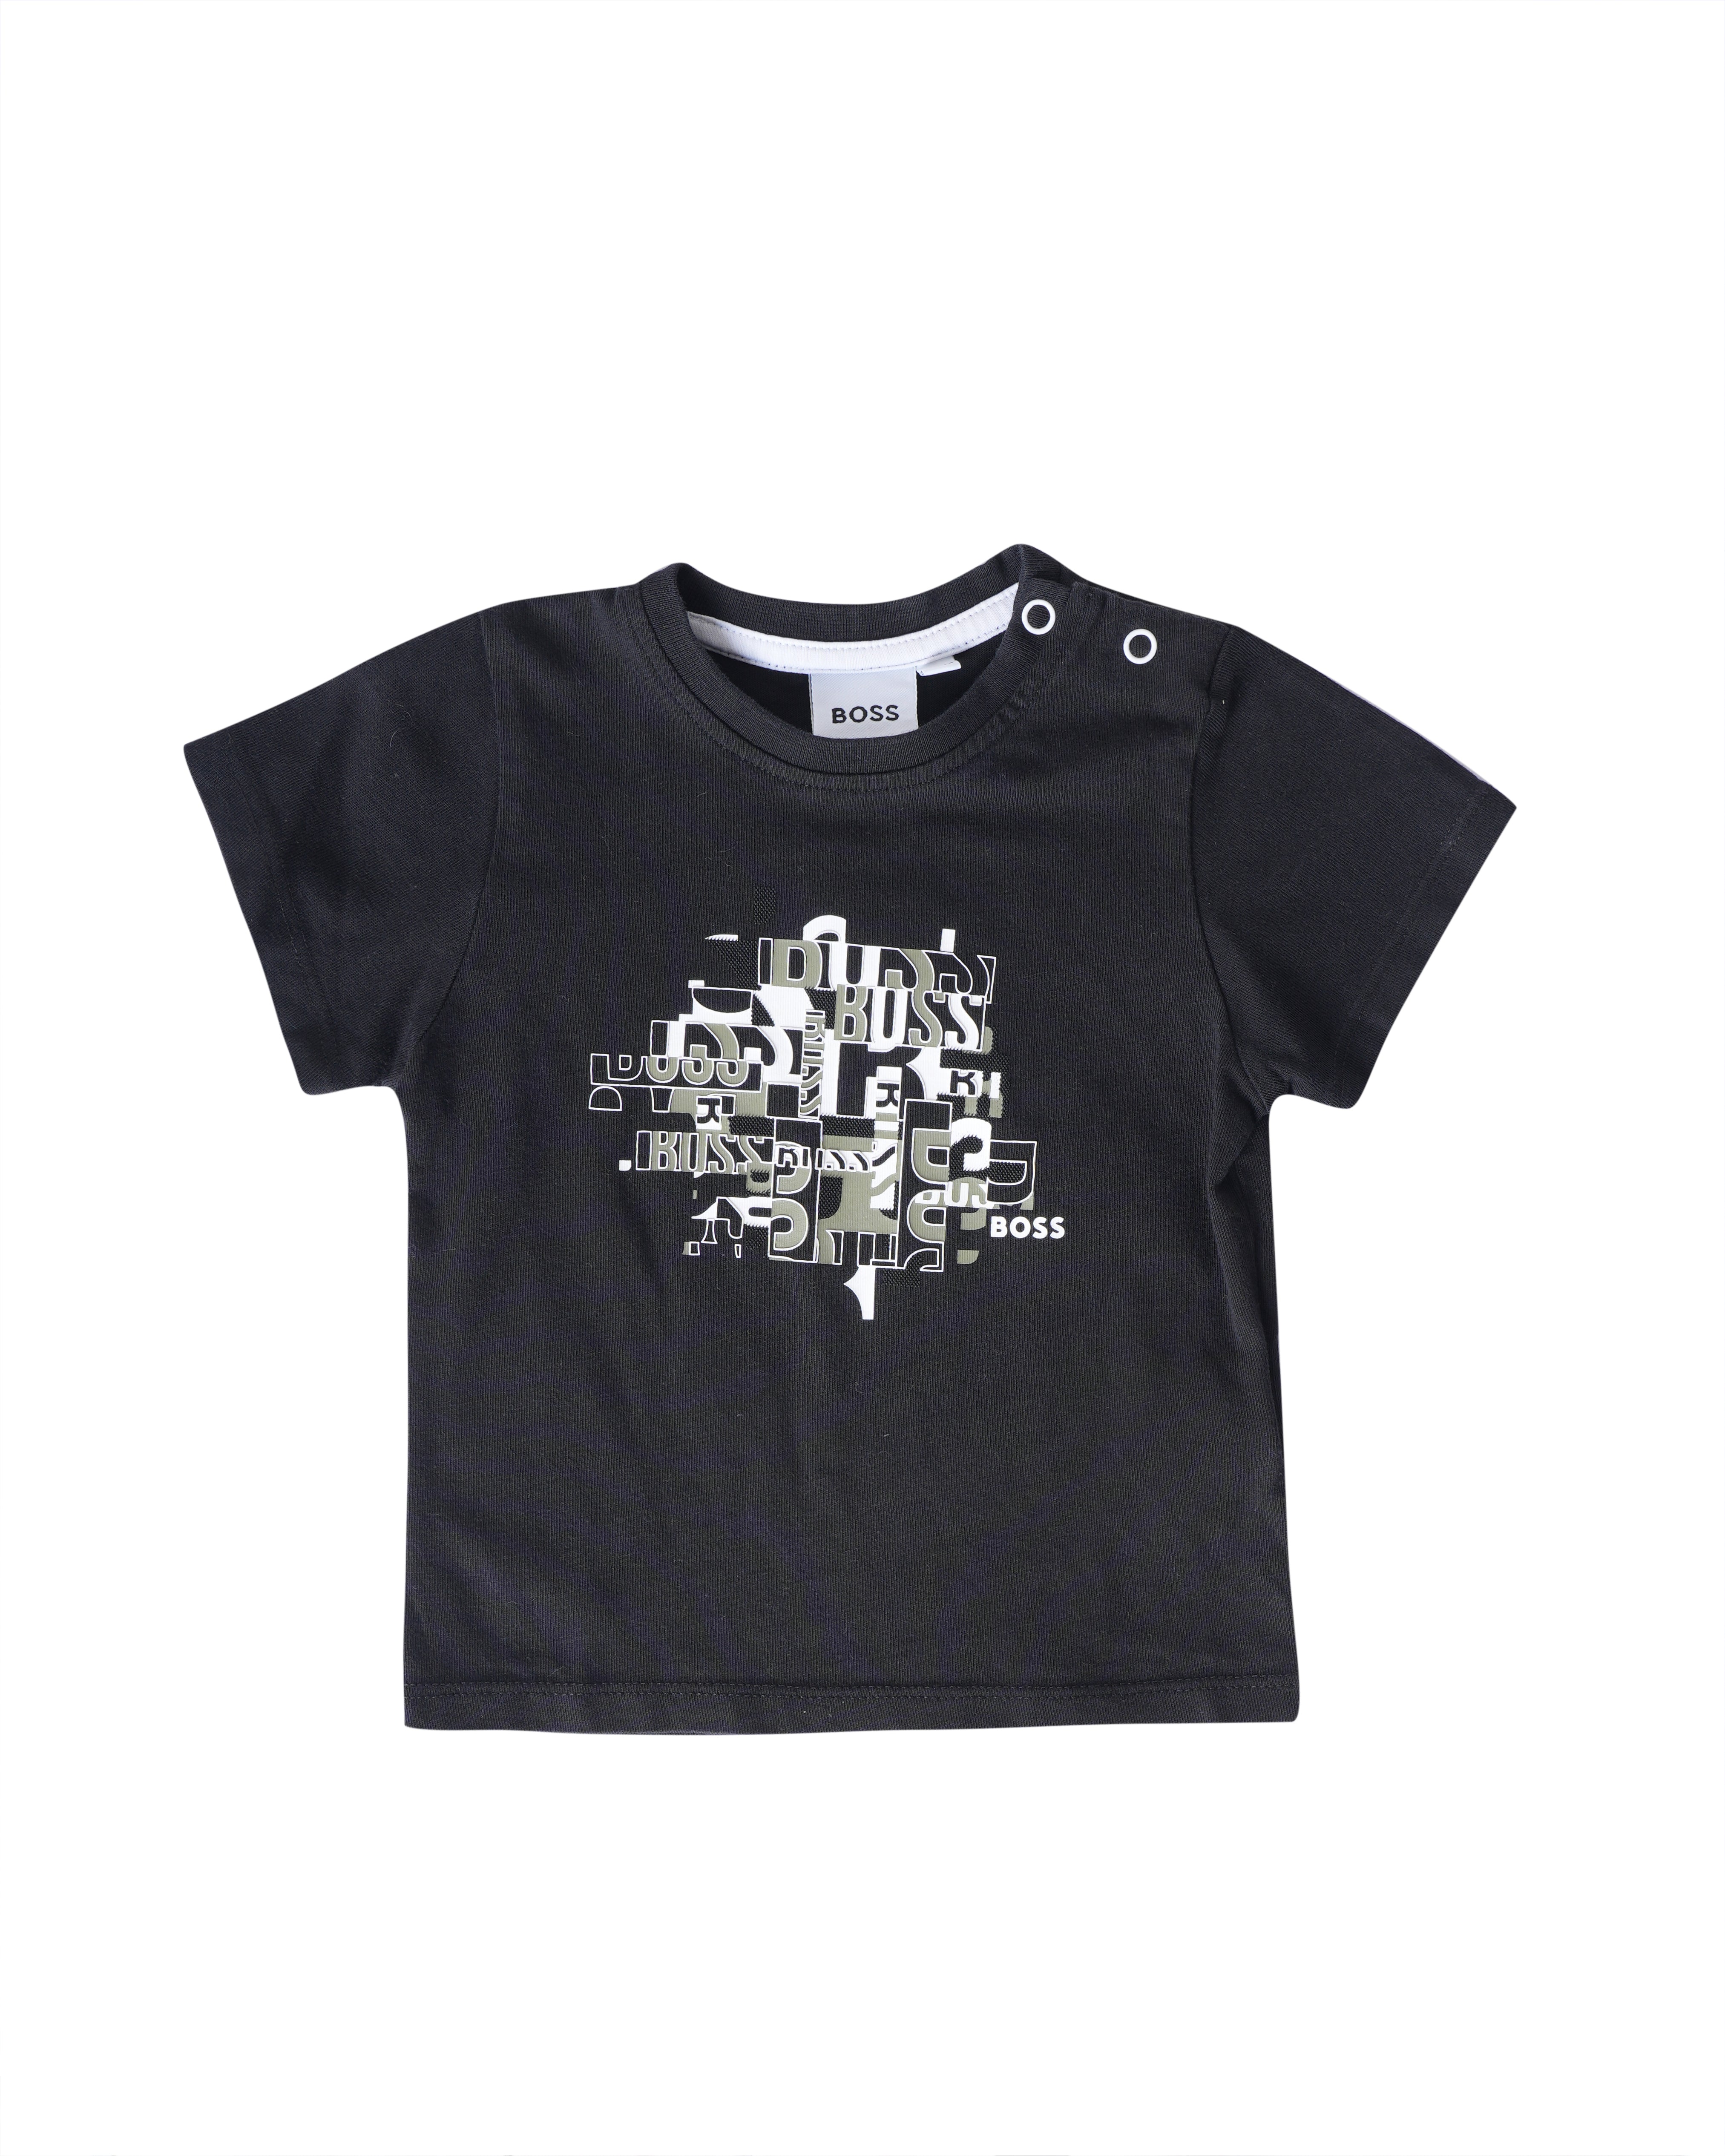 Boss Black T-Shirt With Center Print Placement